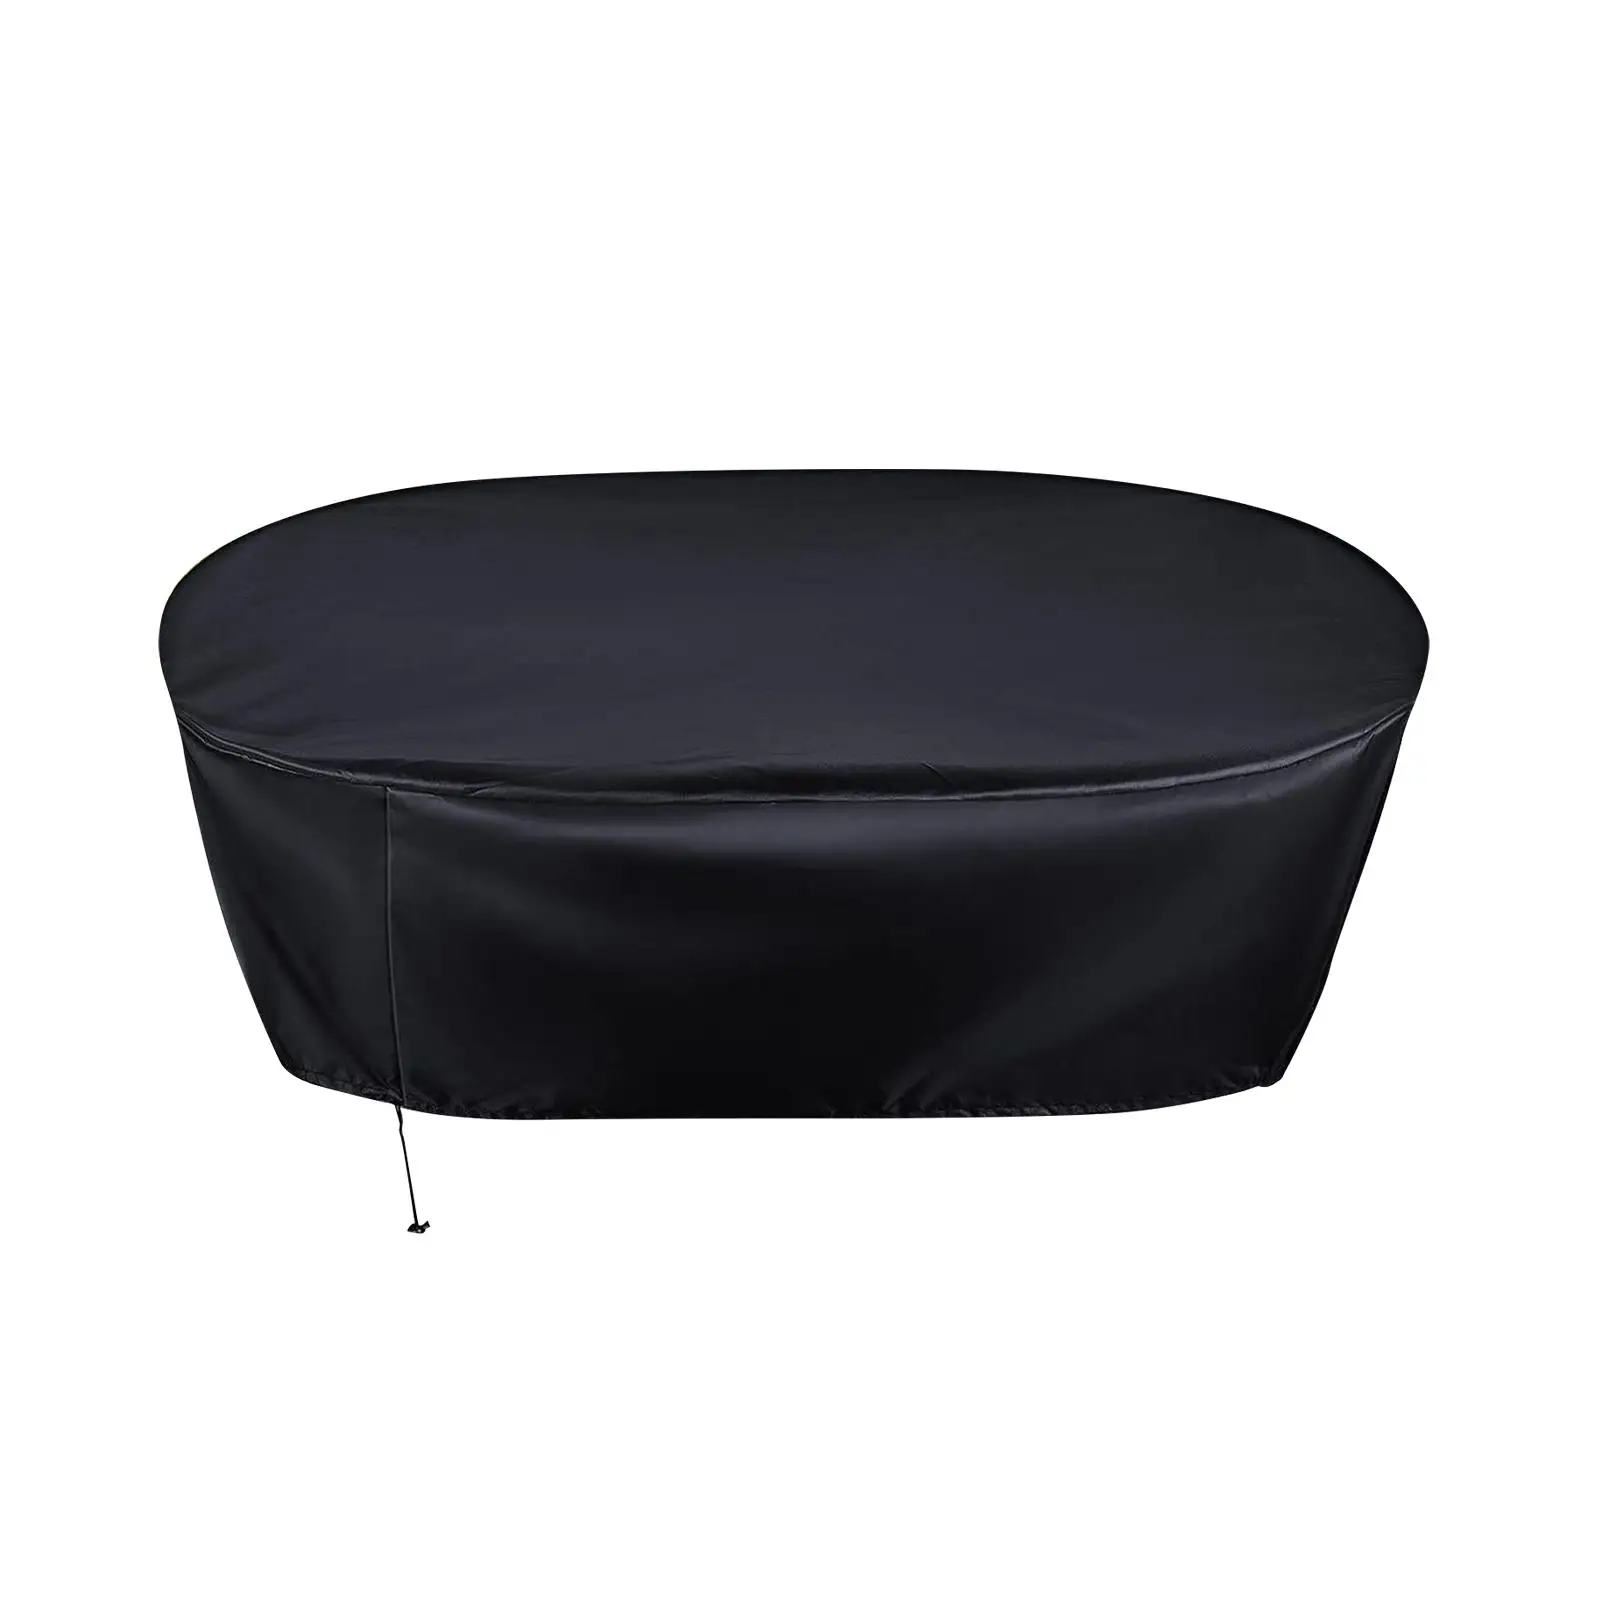 Outdoor Stock Tank Cover Compact with Drawstring Home Backyard Protector Garden Yard Pool Cover Oval Tank above Ground Pool Tub